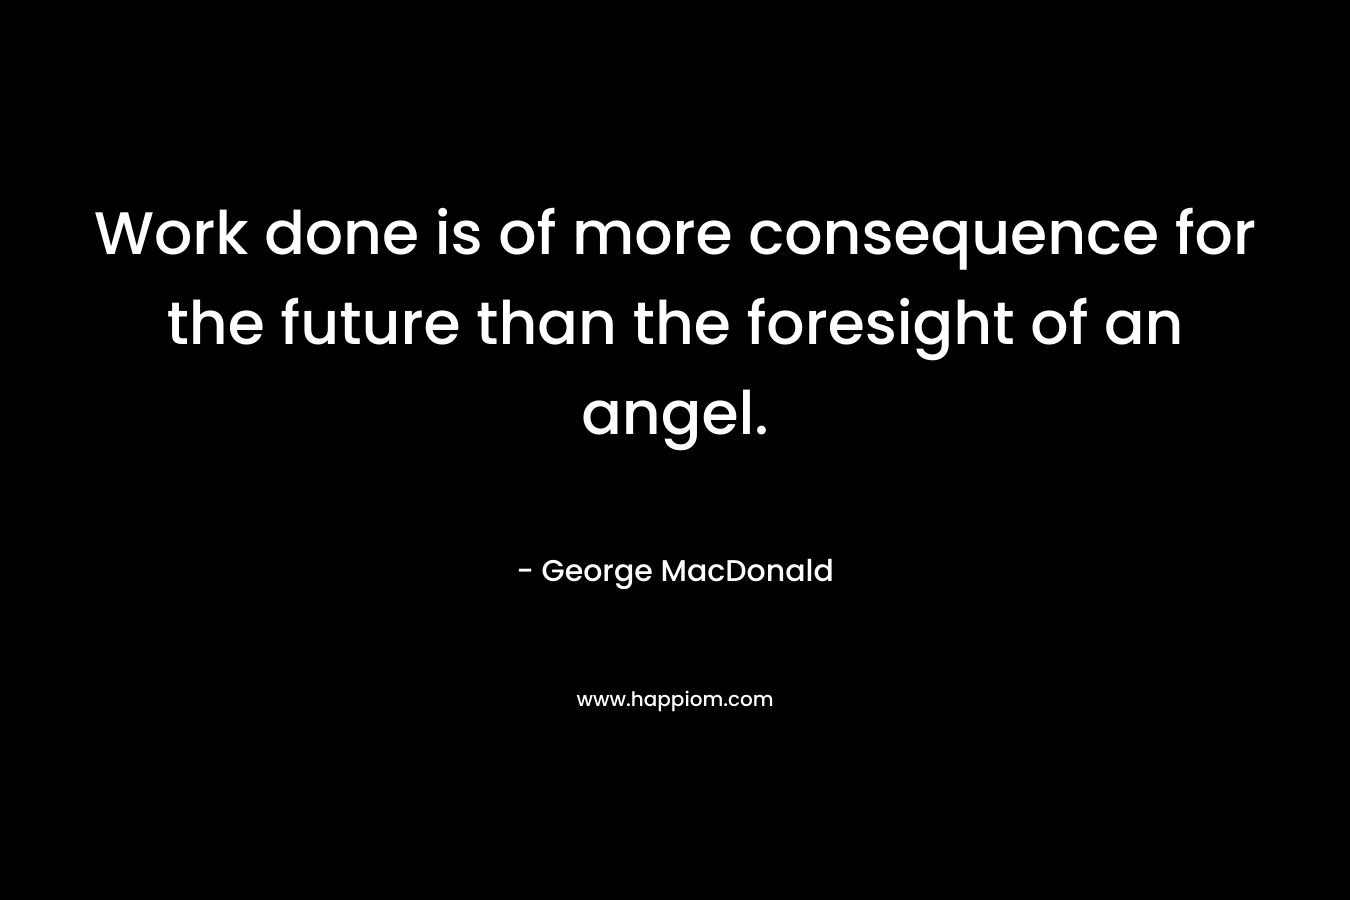 Work done is of more consequence for the future than the foresight of an angel.